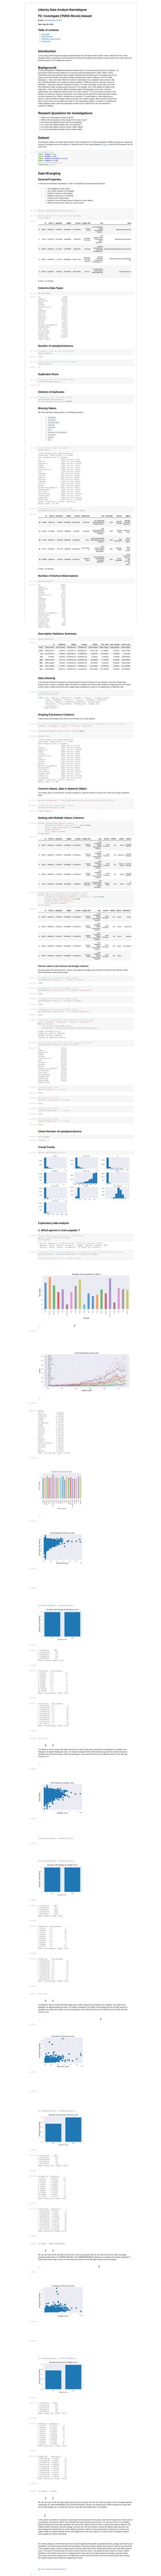 Udacity Data Analyst Nanodegree
P2: Investigate [TMDb Movie] dataset
Author: Mouhamadou GUEYE
Date: May 26, 2019
Table of contents
Introduction
Data Wrangling
Exploratory Data Analysis
Conclusions
Introduction
In this project we will analyze the dataset associated with the informations about 10000 movies collected from the movie
database TMDb. In particular we'll be interested in finding trends ralating most popular movies by genre, the movie rating and
popularity based on the budget and revenue.
Background:
The [Movie Database TMDB](https://www.themoviedb.org/) is a community built movie and TV database.
Every piece of data has been added by our amazing community dating back to 2008. TMDb's strong
international focus and breadth of data is largely unmatched and something we're incredibly proud of. Put
simply, we live and breathe community and that's precisely what makes us different. ### The TMDb
Advantage: 1. Every year since 2008, the number of contributions to our database has increased. With
over 125,000 developers and companies using our platform, TMDb has become a premiere source for
metadata. 2. Along with extensive metadata for movies, TV shows and people, we also offer one of the
best selections of high resolution posters and fan art. On average, over 1,000 images are added every
single day. 3. We're international. While we officially support 39 languages we also have extensive
regional data. Every single day TMDb is used in over 180 countries. 4. Our community is second to none.
Between our staff and community moderators, we're always here to help. We're passionate about making
sure your experience on TMDb is nothing short of amazing. 5. Trusted platform. Every single day our
service is used by millions of people while we process over 2 billion requests. We've proven for years that
this is a service that can be trusted and relied on. This organization profile is not owned or maintained by
TMDb: datasets hosted under this organization profile use the TMDb API but are not endorsed or
certified by TMDb[1].
Reseach Questions for investigations
1. What is the most popular movies by genre?
2. What is the most popular movies by genre from year to year?
3. Do movies with highest revenue have more popularity?
4. Do movies with highest budget have more popularity?
5. Do movies with highest revenue recieve a better rating?
6. Do movies with highest budget recieve a better rating?
Dataset
This data set contains information about 10,000 movies collected from The Movie Database (TMDb),including user ratings and
revenue.The dataset uses in this project is a cleaned version of the original dataset on Kaggle. where its full description can be
found there.
In [1]: # packages import
import numpy as np
import pandas as pd
import matplotlib.pyplot as plt
import seaborn as sns
sns.set_style('darkgrid')
%matplotlib inline
Data Wrangling
General Properties
In this step we will inspect the dataset, in order to undestand it's properties and structures:
The datatypes of each column
The number samples of the dataset
Number of columns in the dataset
Duplicate rows if any in the dataset
Features with missing values
Number of non-null unique value for features in each dataset
What are those unique values are, count of each
In [2]: movies = pd.read_csv('tmdb-movies.csv')
In [3]: # Printing the five first row of the dataframe
movies.head()
Columns Data Types
In [4]: movies.dtypes
Number of samples/columns
In [5]: # number of rows for the movie dataset
movies.shape[0]
In [6]: # Number of columns for the movie dataset
movies.shape[1]
Duplicates Rows
In [7]: # Duplicate rows in the movies dataset
sum(movies.duplicated())
Deletion of duplicates
In [8]: # Duplicate rows n the credit dataset
movies[movies.duplicated()]
movies.drop_duplicates(inplace=True)
Missing Values
We notice that there missing values in the following columns:
homepage
overview
release_date
tagline
runtime
cast
production_companies
director
genres
etc.
In [9]: # informations about the dataset
movies.info()
In [10]: # Inpecting rows with missing values
movies[movies.isnull().any(axis='columns')].head()
Number of Distinct Observations
In [11]: movies.nunique()
Descriptive Statistics Summary
In [12]: movies.describe()
Data Cleaning
In this step we will clean the dataset by removing columns that are irrelevant for our analysis, convert the release date
columns from a string to a datetime object, fill columns for budget and revenue which contains a huge amount of zero values
by their means, handle the columns with multiple values separated by a pipe (|), by splitting them in differents rows.
In [13]: # movies dataset columns
print(movies.columns)
Droping Extraneous Columns
These columns will dropped since they are not relevant on our data analysis.
In [14]: # columns to drop from the movies dataset, thes columns are irrelevant for our data analysis
columns = ['homepage', 'tagline', 'overview', 'keywords']
In [15]: movies.drop(labels=columns, axis=1, inplace=True)
In [16]: movies.info()
Convert release_date in datetime Object
The release_date in a string format, we will use panda's to_datetime method to convert the column from string to datatime
dtype.
In [17]: movies['release_date'] = pd.to_datetime(movies['release_date'],format='%m/%d/%y')
In [18]: # check the date format after cleaning
movies['release_date'].dtype
Dealing with Multiple Values Columns
In [19]: movies= (movies.drop('genres', axis=1)
.join(movies['genres'].str.split('|', expand=True)
.stack().reset_index(level=1,drop=True)
.rename('genres'))
.loc[:, movies.columns])
movies.head()
In [20]: # splitting into row the production_companies columns
movies= (movies.drop('production_companies', axis=1)
.join(movies['production_companies'].str.split('|', expand=True)
.stack().reset_index(level=1,drop=True)
.rename('production_companies'))
.loc[:, movies.columns])
movies.head()
Fill zero value in the revenue and budget columns
Here we inspect the column revenue, revenue_adj, budget and budget_adj counting the number of rows having 0 values
before filling those values with the mean.
In [21]: # inspecting the movies and budget columns
movies[movies['revenue'] == 0].count()['revenue']
In [22]: # inspecting the movies and budget columns
movies[movies['revenue_adj'] == 0].count()['revenue_adj']
In [23]: # inspecting the movies and budget columns
movies[movies['budget'] == 0].count()['budget']
In [24]: # inspecting the movies and budget columns
movies[movies['budget_adj'] == 0].count()['budget_adj']
In [25]: # fill the columns revenue and budget with their mean value
cols = ['budget', 'budget_adj', 'revenue', 'revenue_adj']
for item in cols:
print(item, movies[item].mean())
movies[item] = movies[item].replace({0:movies[item].mean()})
In [26]: # Check Whether the colums have been successfully filled
movies[movies['revenue'].notnull()].count()
In [27]: # should return False
(movies['revenue'] == 0).all()
In [28]: # should return False
(movies['revenue_adj'] == 0).all()
In [29]: # should return False
(movies['budget_adj'] == 0).all()
In [30]: # should return False
(movies['budget_adj'] == 0).all()
Check Number of samples/columns
In [31]: movies.shape
Visual Trends
In [32]: movies.hist(figsize=(15,10));
Exploratory data analysis
1. Which genres is more popular ?
In [33]: # unique genres movies existing in the dataframe
genres = movies['genres'].unique()
print(genres)
In [34]: # grouping movies by genre projecting on the popularity column and calculation of the mean
movies_by_genres = movies.groupby('genres')['popularity'].mean()
# plottting the bar chart of movies by genre
movies_by_genres.plot(kind='bar', alpha=.7, figsize=(15,6))
plt.xlabel("Genres", fontsize=18);
plt.ylabel("Popularity", fontsize=18);
plt.xticks(fontsize=10)
plt.title('Average movie popularity by genre', fontsize=18);
plt.grid(True)
2. Which genres is most popular from year to year?
In [35]: # plot data
fig, ax = plt.subplots(figsize=(15,7))
# grouping movies by genre
grouped= movies.groupby(['release_year', 'genres']).count()['popularity']
.unstack().plot(ax=ax, figsize=(15,6))
plt.xlabel("release year", fontsize=18);
plt.ylabel("count", fontsize=18);
plt.xticks(fontsize=10)
plt.title('movie popularity year by year', fontsize=18);
3. What Moving Genres recieves the highest average rating?
In [36]: # grouping the movies by genres and projecting on the rating column
rating = movies.groupby('genres')['vote_average'].mean()
rating
In [37]: # bar chart of the movies mean rating by genre
rating.plot(kind='bar', alpha=0.7)
plt.xlabel('Movie Genre', fontsize=12)
plt.ylabel('Vote Average', fontsize=12)
plt.title('Average Movie Quality by Genre', fontsize=12)
plt.grid(True)
4. Do movies with high revenue recieve the highest rating?
In [38]: plt.scatter(movies['revenue_adj'], movies['vote_average'], linewidth=5)
plt.title('Vote Ratings by Revenue Level', fontsize=15)
plt.xlabel('Revenue Level', fontsize=15)
plt.ylabel('Average Vote Rating', fontsize=15);
plt.show()
In [39]: # mean rating for each revenue level
median_rev = movies['revenue_adj'].median()
low = movies.query('revenue_adj < {}'.format(median_rev))
high = movies.query('revenue_adj >= {}'.format(median_rev))
# filtering to vote_average columns and calculation of the mean
mean_low = low['vote_average'].mean()
mean_high = high['vote_average'].mean()
In [40]: heights = [mean_low, mean_high]
print(heights)
labels = ['low', 'high']
locations = [1,2]
plt.bar(locations, heights, tick_label=labels)
plt.title('Average Vote Ratings by Revenue Level', fontsize=15)
plt.xlabel('Revenue Level', fontsize=12)
plt.ylabel('Average Vote Rating', fontsize=15);
In [41]: # counting the movie revenue unique values
movies.revenue.value_counts().head()
In [42]: # 10 first values
movies.groupby('revenue_adj')['vote_average'].value_counts().head(10)
In [43]: # 10 last values
movies.groupby('revenue_adj')['vote_average'].value_counts().tail(10)
In [44]: # comparison of the median popularity of movies with low and high revenue
movies.query('revenue_adj < {}'.format(median_rev))['vote_average'].median(), movies.query('revenue_
adj > {}'.format(median_rev))['vote_average'].median()
Partial conclusion
It is difficult to say the movies with high revenue have a better rating since according to the histogram, the height of the
histogram are approximativaty the same. For deeper comparison the median vote average with low and high revenue is
calculated. we notice that median movie vote average for movie with low revenue is 6.0 while the one of movie with high
revenue is 6.3.
5. Do movies with high budget get the highest rating?
In [45]: # scatter plot of the budget versus vote rating
plt.scatter(movies['budget_adj'], movies['vote_average'], linewidth=5)
plt.title('Vote Ratings by Budget Level', fontsize=15)
plt.xlabel('Budget Level', fontsize=15)
plt.ylabel('Vote Rating', fontsize=15);
plt.show()
In [46]: # mean rating for each revenue level
median_bud = movies['budget_adj'].median()
low = movies.query('budget_adj < {}'.format(median_bud))
high = movies.query('budget_adj >= {}'.format(median_bud))
# filtering to vote_average columns and calculation of the mean
mean_low = low['vote_average'].mean()
mean_high = high['vote_average'].mean()
print([mean_low, mean_high])
In [47]: heights = [mean_low, mean_high]
print(heights)
labels = ['low', 'high']
locations = [1,2]
plt.bar(locations, heights, tick_label=labels)
plt.title('Average Vote Ratings by Budget Level', fontsize=15)
plt.xlabel('Budget Level', fontsize=12)
plt.ylabel('Average Vote Rating', fontsize=15);
In [48]: # counting the movie revenue unique values
movies.budget.value_counts().head()
In [49]: # 10 first values
movies.groupby('budget_adj')['vote_average'].value_counts().head(10)
In [50]: # 10 last values
movies.groupby('budget_adj')['vote_average'].value_counts().tail(10)
In [51]: # comparison of the median popularity of movies with low and high revenue
(movies.query('budget_adj < {}'.format(median_rev))['vote_average'].median(),
movies.query('budget_adj > {}'.format(median_rev))['vote_average'].median())
Partial conclusion
It is difficult to say the movies with high budget have a better rating since according to the histogram, the height of the
histogram are approximativaty the same. For deeper comparison the median vote average with low and high revenue is
calculated. we notice that median movie vote average for movie with low revenue is 6.0 while the one of movie with high
revenue is 6.2.
6. Do movies with highest revenue have more popularity?
In [52]: plt.scatter(movies['revenue_adj'], movies['popularity'], linewidth=5)
plt.title('Popularity by Revenue Level', fontsize=15)
plt.xlabel('Revenue Level', fontsize=15)
plt.ylabel('Average Popularity', fontsize=15);
plt.show()
In [53]: # mean rating for each revenue level
median_rev = movies['revenue_adj'].median()
low = movies.query('revenue_adj < {}'.format(median_rev))
high = movies.query('revenue_adj >= {}'.format(median_rev))
# filtering to popularity columns and calculation of the mean
mean_low = low['popularity'].mean()
mean_high = high['popularity'].mean()
In [54]: # list of the mean and high revenue for historgram chart
heights = [mean_low, mean_high]
print(heights)
labels = ['low', 'high']
locations = [1,2]
plt.bar(locations, heights, tick_label=labels)
plt.title('Average Popularity by Revenue Level', fontsize=15)
plt.xlabel('Revenue Level', fontsize=12)
plt.ylabel('Average Popularity', fontsize=15);
In [55]: # counting the movie revenue unique values
movies.revenue_adj.value_counts().head()
In [56]: # 10 first values
movies.groupby('revenue_adj')['popularity'].value_counts().head(10)
In [57]: # 10 last values
movies.groupby('revenue_adj')['popularity'].value_counts().tail(10)
In [58]: # comparison of the median popularity of movies with low and high revenue
(movies.query('revenue_adj < {}'.format(median_rev))['popularity'].median(),
movies.query('revenue_adj > {}'.format(median_rev))['popularity'].median())
Partial conclusion
We can see that, the film with high revenue seem to be more popular than the ones with low revenue, with an average
popularity respectively of 0.7420684714824547 and 0.9989869505300212. Morever by comparing the median popularity of
movies with low and high revenue, we can clearly see that the movie with high revenue are more popular.
7. Do movies with highest budget have more popularity?
In [59]: # scatter plot of the movies budget versus popularity
plt.scatter(movies['budget_adj'], movies['popularity'], linewidth=5)
plt.title('Popularity by Revenue Level', fontsize=15)
plt.xlabel('Budget Level', fontsize=15)
plt.ylabel('Average Popularity', fontsize=15);
plt.show()
In [60]: # mean rating for each revenue level
median_rev = movies['budget_adj'].median()
low = movies.query('budget_adj < {}'.format(median_rev))
high = movies.query('budget_adj >= {}'.format(median_rev))
# filtering to popularity columns and calculation of the mean
mean_low = low['popularity'].mean()
mean_high = high['popularity'].mean()
In [61]: heights = [mean_low, mean_high]
print(heights)
labels = ['low', 'high']
locations = [1,2]
plt.bar(locations, heights, tick_label=labels)
plt.title('Average Popularity by Budget Level', fontsize=15)
plt.xlabel('Budget Level', fontsize=12)
plt.ylabel('Average Popularity', fontsize=15);
In [62]: # counting the movie budget unique values
movies.budget_adj.value_counts().head()
In [63]: # 10 first values
movies.groupby('budget_adj')['popularity'].value_counts().head(10)
In [64]: # 10 last values
movies.groupby('budget_adj')['popularity'].value_counts().tail(10)
In [65]: # comparison of the median popularity of movies with low and high revenue
(movies.query('budget_adj < {}'.format(median_rev))['popularity'].median(),
movies.query('budget_adj > {}'.format(median_rev))['popularity'].median())
Partial conclusion
We can see that, the film with high budget seem to be more popular than the ones with low budget, with an average popularity
respectively of 0.7564478409230605 and 0.979017978784679. Morever by comparing the median popularity of movies with
low and high budget, we can clearly see that the movie with high budget seem more popular.
Conclusions
In this project, we started our analysis by examining the most popular movie by genre. We notice the adventure movies are the
most popular movies genre. We've, then examined, the movie popularity year by year. For, this since there is no correlation
between release_year and movie popularity, the count of the realese movie each year is used for the analysis. Based on the
relation between the genres and vote avarage, we found that, the Documentary recieves the highest rating. Moreover, we
have analyzed the dataset trying to answer different questions related to movies popularity and rating versus revenue and
budget. While the movies with high revenue and budget seem to be more popular, we could not find a correlation between
movie budget and revenue with rating.
Limitations
For a better analysis, a more details seems to be useful regarding the variables popularity and vote_average and how they are
calculated? The factors/criteria used for their calculations. During the analysis process the columns in which we are interested
in this analayis (budget, revenue, budget_adj and revenue_adj) contain many missing values which have been filled using the
mean. This seems not the best way to fix those columns since the mean is not always the best measure of center. Another
limitations in this analysis, the process of categorizing the movie with low and high revenue and budget using the median.
Since some movie have a huge amount of budget and revenue and the fact that we fill many missing values with the mean,
the median should not be the best for categoring the movie.
References:
[1]: https://www.themoviedb.org/about
In [ ]:
Out[3]:
id imdb_id popularity budget revenue original_title cast home
0 135397 tt0369610 32.985763 150000000 1513528810
Jurassic
World
Chris Pratt|Bryce
Dallas
Howard|Irrfan
Khan|Vi...
http://www.jurassicworld
1 76341 tt1392190 28.419936 150000000 378436354
Mad Max:
Fury Road
Tom
Hardy|Charlize
Theron|Hugh
Keays-
Byrne|Nic...
http://www.madmaxmovie
2 262500 tt2908446 13.112507 110000000 295238201 Insurgent
Shailene
Woodley|Theo
James|Kate
Winslet|Ansel...
http://www.thedivergentseries.movie/#insu
3 140607 tt2488496 11.173104 200000000 2068178225
Star Wars:
The Force
Awakens
Harrison
Ford|Mark
Hamill|Carrie
Fisher|Adam D...
http://www.starwars.com/films/star-w
epi
4 168259 tt2820852 9.335014 190000000 1506249360 Furious 7
Vin Diesel|Paul
Walker|Jason
Statham|Michelle
...
http://www.furious7
5 rows × 21 columns
Out[4]: id int64
imdb_id object
popularity float64
budget int64
revenue int64
original_title object
cast object
homepage object
director object
tagline object
keywords object
overview object
runtime int64
genres object
production_companies object
release_date object
vote_count int64
vote_average float64
release_year int64
budget_adj float64
revenue_adj float64
dtype: object
Out[5]: 10866
Out[6]: 21
Out[7]: 1
<class 'pandas.core.frame.DataFrame'>
Int64Index: 10865 entries, 0 to 10865
Data columns (total 21 columns):
id 10865 non-null int64
imdb_id 10855 non-null object
popularity 10865 non-null float64
budget 10865 non-null int64
revenue 10865 non-null int64
original_title 10865 non-null object
cast 10789 non-null object
homepage 2936 non-null object
director 10821 non-null object
tagline 8041 non-null object
keywords 9372 non-null object
overview 10861 non-null object
runtime 10865 non-null int64
genres 10842 non-null object
production_companies 9835 non-null object
release_date 10865 non-null object
vote_count 10865 non-null int64
vote_average 10865 non-null float64
release_year 10865 non-null int64
budget_adj 10865 non-null float64
revenue_adj 10865 non-null float64
dtypes: float64(4), int64(6), object(11)
memory usage: 1.8+ MB
Out[10]:
id imdb_id popularity budget revenue original_title cast homepage director tagline
18 150689 tt1661199 5.556818 95000000 542351353 Cinderella
Lily James|Cate
Blanchett|Richard
Madden|Helen...
NaN
Kenneth
Branagh
Midnight
is just the
beginning.
21 307081 tt1798684 5.337064 30000000 91709827 Southpaw
Jake
Gyllenhaal|Rachel
McAdams|Forest
Whitaker...
NaN
Antoine
Fuqua
Believe in
Hope.
26 214756 tt2637276 4.564549 68000000 215863606 Ted 2
Mark Wahlberg|Seth
MacFarlane|Amanda
Seyfried|...
NaN
Seth
MacFarlane
Ted is
Coming,
Again.
32 254470 tt2848292 3.877764 29000000 287506194
Pitch Perfect
2
Anna
Kendrick|Rebel
Wilson|Hailee
Steinfeld|Br...
NaN
Elizabeth
Banks
We're
back
pitches
33 296098 tt3682448 3.648210 40000000 162610473
Bridge of
Spies
Tom Hanks|Mark
Rylance|Amy
Ryan|Alan
Alda|Seba...
NaN
Steven
Spielberg
In the
shadow of
war, one
man
showed
the
world...
5 rows × 21 columns
Out[11]: id 10865
imdb_id 10855
popularity 10814
budget 557
revenue 4702
original_title 10571
cast 10719
homepage 2896
director 5067
tagline 7997
keywords 8804
overview 10847
runtime 247
genres 2039
production_companies 7445
release_date 5909
vote_count 1289
vote_average 72
release_year 56
budget_adj 2614
revenue_adj 4840
dtype: int64
Out[12]:
id popularity budget revenue runtime vote_count vote_average release_year
count 10865.000000 10865.000000 1.086500e+04 1.086500e+04 10865.000000 10865.000000 10865.000000 10865.000000
mean 66066.374413 0.646446 1.462429e+07 3.982690e+07 102.071790 217.399632 5.975012 2001.321859
std 92134.091971 1.000231 3.091428e+07 1.170083e+08 31.382701 575.644627 0.935138 12.813260
min 5.000000 0.000065 0.000000e+00 0.000000e+00 0.000000 10.000000 1.500000 1960.000000
25% 10596.000000 0.207575 0.000000e+00 0.000000e+00 90.000000 17.000000 5.400000 1995.000000
50% 20662.000000 0.383831 0.000000e+00 0.000000e+00 99.000000 38.000000 6.000000 2006.000000
75% 75612.000000 0.713857 1.500000e+07 2.400000e+07 111.000000 146.000000 6.600000 2011.000000
max 417859.000000 32.985763 4.250000e+08 2.781506e+09 900.000000 9767.000000 9.200000 2015.000000
Index(['id', 'imdb_id', 'popularity', 'budget', 'revenue', 'original_title',
'cast', 'homepage', 'director', 'tagline', 'keywords', 'overview',
'runtime', 'genres', 'production_companies', 'release_date',
'vote_count', 'vote_average', 'release_year', 'budget_adj',
'revenue_adj'],
dtype='object')
<class 'pandas.core.frame.DataFrame'>
Int64Index: 10865 entries, 0 to 10865
Data columns (total 17 columns):
id 10865 non-null int64
imdb_id 10855 non-null object
popularity 10865 non-null float64
budget 10865 non-null int64
revenue 10865 non-null int64
original_title 10865 non-null object
cast 10789 non-null object
director 10821 non-null object
runtime 10865 non-null int64
genres 10842 non-null object
production_companies 9835 non-null object
release_date 10865 non-null object
vote_count 10865 non-null int64
vote_average 10865 non-null float64
release_year 10865 non-null int64
budget_adj 10865 non-null float64
revenue_adj 10865 non-null float64
dtypes: float64(4), int64(6), object(7)
memory usage: 1.5+ MB
Out[18]: dtype('<M8[ns]')
Out[19]:
id imdb_id popularity budget revenue original_title cast director runtime genres product
0 135397 tt0369610 32.985763 150000000 1513528810
Jurassic
World
Chris
Pratt|Bryce
Dallas
Howard|Irrfan
Khan|Vi...
Colin
Trevorrow
124 Action
Universa
Entertain
0 135397 tt0369610 32.985763 150000000 1513528810
Jurassic
World
Chris
Pratt|Bryce
Dallas
Howard|Irrfan
Khan|Vi...
Colin
Trevorrow
124 Adventure
Universa
Entertain
0 135397 tt0369610 32.985763 150000000 1513528810
Jurassic
World
Chris
Pratt|Bryce
Dallas
Howard|Irrfan
Khan|Vi...
Colin
Trevorrow
124
Science
Fiction
Universa
Entertain
0 135397 tt0369610 32.985763 150000000 1513528810
Jurassic
World
Chris
Pratt|Bryce
Dallas
Howard|Irrfan
Khan|Vi...
Colin
Trevorrow
124 Thriller
Universa
Entertain
1 76341 tt1392190 28.419936 150000000 378436354
Mad Max:
Fury Road
Tom
Hardy|Charlize
Theron|Hugh
Keays-
Byrne|Nic...
George
Miller
120 Action
Vi
Pictures
Out[20]:
id imdb_id popularity budget revenue original_title cast director runtime genres production_c
0 135397 tt0369610 32.985763 150000000 1513528810
Jurassic
World
Chris
Pratt|Bryce
Dallas
Howard|Irrfan
Khan|Vi...
Colin
Trevorrow
124 Action Univers
0 135397 tt0369610 32.985763 150000000 1513528810
Jurassic
World
Chris
Pratt|Bryce
Dallas
Howard|Irrfan
Khan|Vi...
Colin
Trevorrow
124 Action Amblin Ent
0 135397 tt0369610 32.985763 150000000 1513528810
Jurassic
World
Chris
Pratt|Bryce
Dallas
Howard|Irrfan
Khan|Vi...
Colin
Trevorrow
124 Action Legenda
0 135397 tt0369610 32.985763 150000000 1513528810
Jurassic
World
Chris
Pratt|Bryce
Dallas
Howard|Irrfan
Khan|Vi...
Colin
Trevorrow
124 Action Fuji Televisio
0 135397 tt0369610 32.985763 150000000 1513528810
Jurassic
World
Chris
Pratt|Bryce
Dallas
Howard|Irrfan
Khan|Vi...
Colin
Trevorrow
124 Action
Out[21]: 76851
Out[22]: 76851
Out[23]: 69433
Out[24]: 69433
budget 26775356.47371121
budget_adj 30889712.59859798
revenue 70334023.35863845
revenue_adj 84260108.11800905
Out[26]: id 181294
imdb_id 181249
popularity 181294
budget 181294
revenue 181294
original_title 181294
cast 181023
director 181104
runtime 181294
genres 181270
production_companies 179082
release_date 181294
vote_count 181294
vote_average 181294
release_year 181294
budget_adj 181294
revenue_adj 181294
dtype: int64
Out[27]: False
Out[28]: False
Out[29]: False
Out[30]: False
Out[31]: (181294, 17)
['Action' 'Adventure' 'Science Fiction' 'Thriller' 'Fantasy' 'Crime'
'Western' 'Drama' 'Family' 'Animation' 'Comedy' 'Mystery' 'Romance' 'War'
'History' 'Music' 'Horror' 'Documentary' 'TV Movie' nan 'Foreign']
Out[36]: genres
Action 5.859801
Adventure 5.962865
Animation 6.333965
Comedy 5.917464
Crime 6.112665
Documentary 6.957312
Drama 6.156389
Family 5.973175
Fantasy 5.895793
Foreign 5.892970
History 6.417070
Horror 5.444786
Music 6.302175
Mystery 5.986585
Romance 6.059295
Science Fiction 5.738771
TV Movie 5.651250
Thriller 5.848404
War 6.336557
Western 6.101556
Name: vote_average, dtype: float64
[5.971800334804548, 5.967507674675677]
Out[41]: 7.033402e+07 76851
2.000000e+06 152
2.000000e+07 126
1.200000e+07 126
5.318650e+08 125
Name: revenue, dtype: int64
Out[42]: revenue_adj vote_average
2.370705 6.4 12
2.861934 6.8 12
3.038360 7.7 5
5.926763 6.8 4
6.951084 4.9 8
8.585801 4.5 4
9.056820 6.7 20
9.115080 5.1 2
10.000000 4.2 9
10.296367 6.5 18
Name: vote_average, dtype: int64
Out[43]: revenue_adj vote_average
1.443191e+09 7.3 9
1.574815e+09 6.6 16
1.583050e+09 5.6 25
1.791694e+09 7.2 32
1.902723e+09 7.5 48
1.907006e+09 7.3 18
2.167325e+09 7.2 18
2.506406e+09 7.3 27
2.789712e+09 7.9 18
2.827124e+09 7.1 64
Name: vote_average, dtype: int64
Out[44]: (6.0, 6.3)
[5.981346153846566, 5.963905517657313]
[5.981346153846566, 5.963905517657313]
Out[48]: 2.677536e+07 69433
2.000000e+07 4331
2.500000e+07 4255
3.000000e+07 3902
4.000000e+07 3584
Name: budget, dtype: int64
Out[49]: budget_adj vote_average
0.921091 4.1 3
0.969398 5.3 20
1.012787 6.5 48
1.309053 4.8 8
2.908194 6.5 12
3.000000 7.3 12
4.519285 5.6 9
4.605455 6.0 1
5.006696 5.8 27
8.102293 6.9 45
Name: vote_average, dtype: int64
Out[50]: budget_adj vote_average
2.504192e+08 5.8 16
2.541001e+08 7.3 18
2.575999e+08 7.4 27
2.600000e+08 7.3 8
2.713305e+08 5.8 27
2.716921e+08 7.3 27
2.920507e+08 5.3 64
3.155006e+08 6.8 27
3.683713e+08 6.3 27
4.250000e+08 6.4 25
Name: vote_average, dtype: int64
Out[51]: (6.0, 6.2)
[0.7420684714824547, 0.9989869505300212]
Out[55]: 8.426011e+07 76851
2.358000e+07 125
4.978434e+08 125
2.231273e+07 125
1.934053e+07 125
Name: revenue_adj, dtype: int64
Out[56]: revenue_adj popularity
2.370705 0.462609 12
2.861934 0.552091 12
3.038360 0.352054 5
5.926763 0.208637 4
6.951084 0.578849 8
8.585801 0.183034 4
9.056820 0.450208 20
9.115080 0.113082 2
10.000000 0.559371 9
10.296367 0.222776 18
Name: popularity, dtype: int64
Out[57]: revenue_adj popularity
1.443191e+09 7.637767 9
1.574815e+09 2.631987 16
1.583050e+09 1.136610 25
1.791694e+09 2.900556 32
1.902723e+09 11.173104 48
1.907006e+09 2.563191 18
2.167325e+09 2.010733 18
2.506406e+09 4.355219 27
2.789712e+09 12.037933 18
2.827124e+09 9.432768 64
Name: popularity, dtype: int64
Out[58]: (0.58808, 1.4886709999999999)
[0.7564478409230605, 0.9790179787846799]
Out[62]: 3.088971e+07 69433
2.032801e+07 532
2.103337e+07 421
4.065602e+07 385
2.908194e+07 381
Name: budget_adj, dtype: int64
Out[63]: budget_adj popularity
0.921091 0.177102 3
0.969398 0.520430 20
1.012787 0.472691 48
1.309053 0.090186 8
2.908194 0.228643 12
3.000000 0.028456 12
4.519285 0.464188 9
4.605455 0.002922 1
5.006696 0.317091 27
8.102293 0.626646 45
Name: popularity, dtype: int64
Out[64]: budget_adj popularity
2.504192e+08 1.232098 16
2.541001e+08 5.076472 18
2.575999e+08 5.944927 27
2.600000e+08 2.865684 8
2.713305e+08 2.520912 27
2.716921e+08 4.355219 27
2.920507e+08 1.957331 64
3.155006e+08 4.965391 27
3.683713e+08 4.955130 27
4.250000e+08 0.250540 25
Name: popularity, dtype: int64
Out[65]: (0.534192, 1.138395)
 